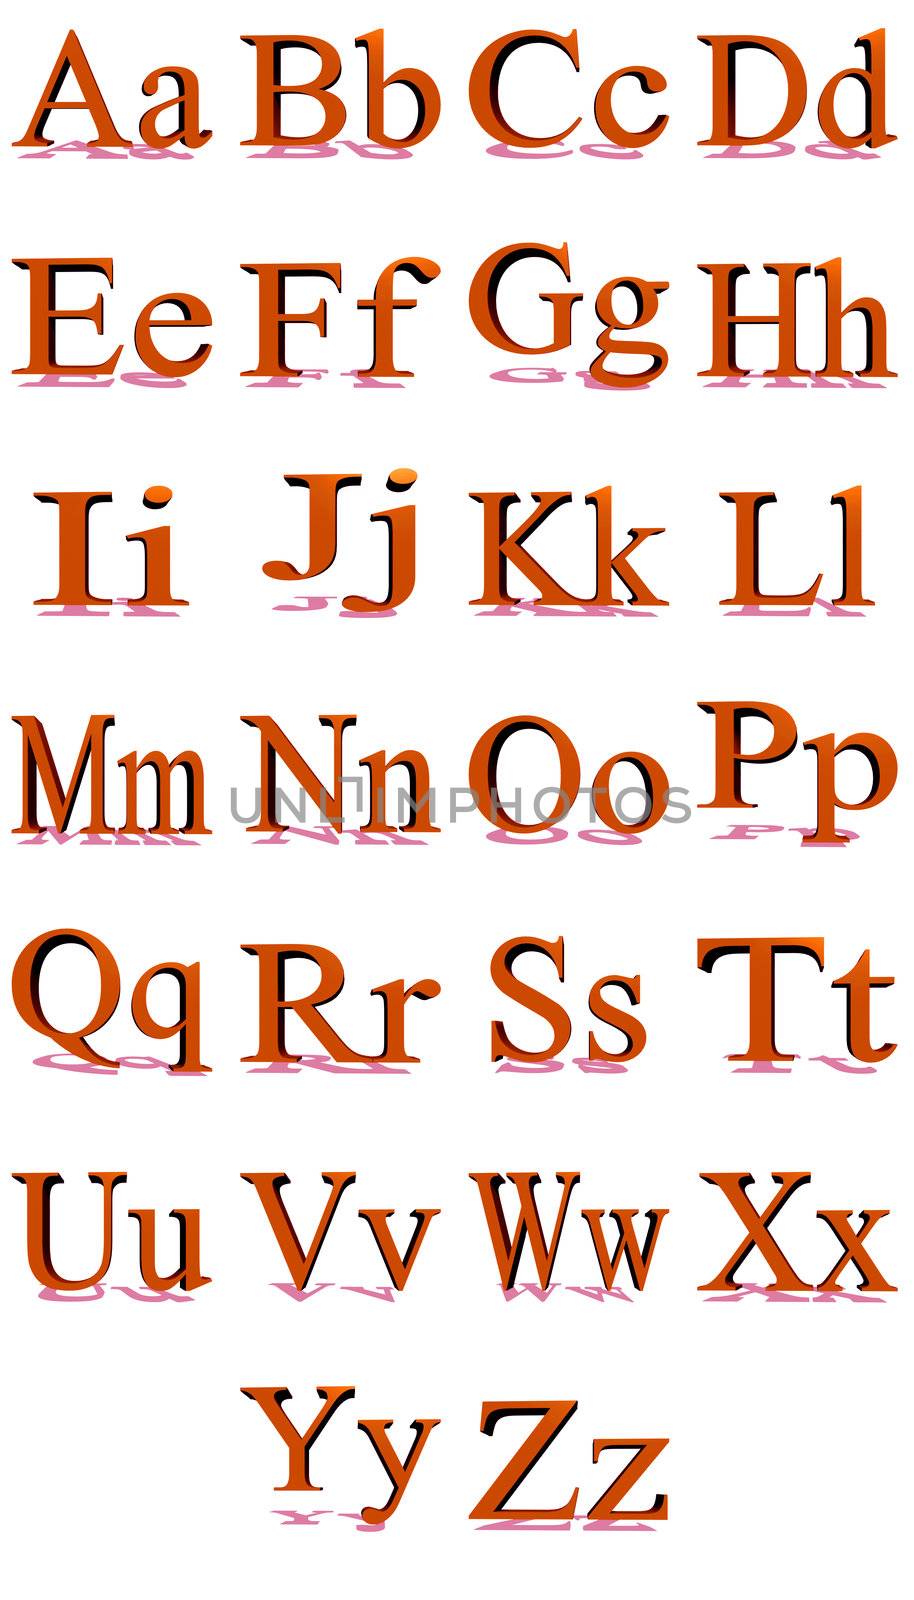 3D Times New Roman red alphabet with shadows in a white background